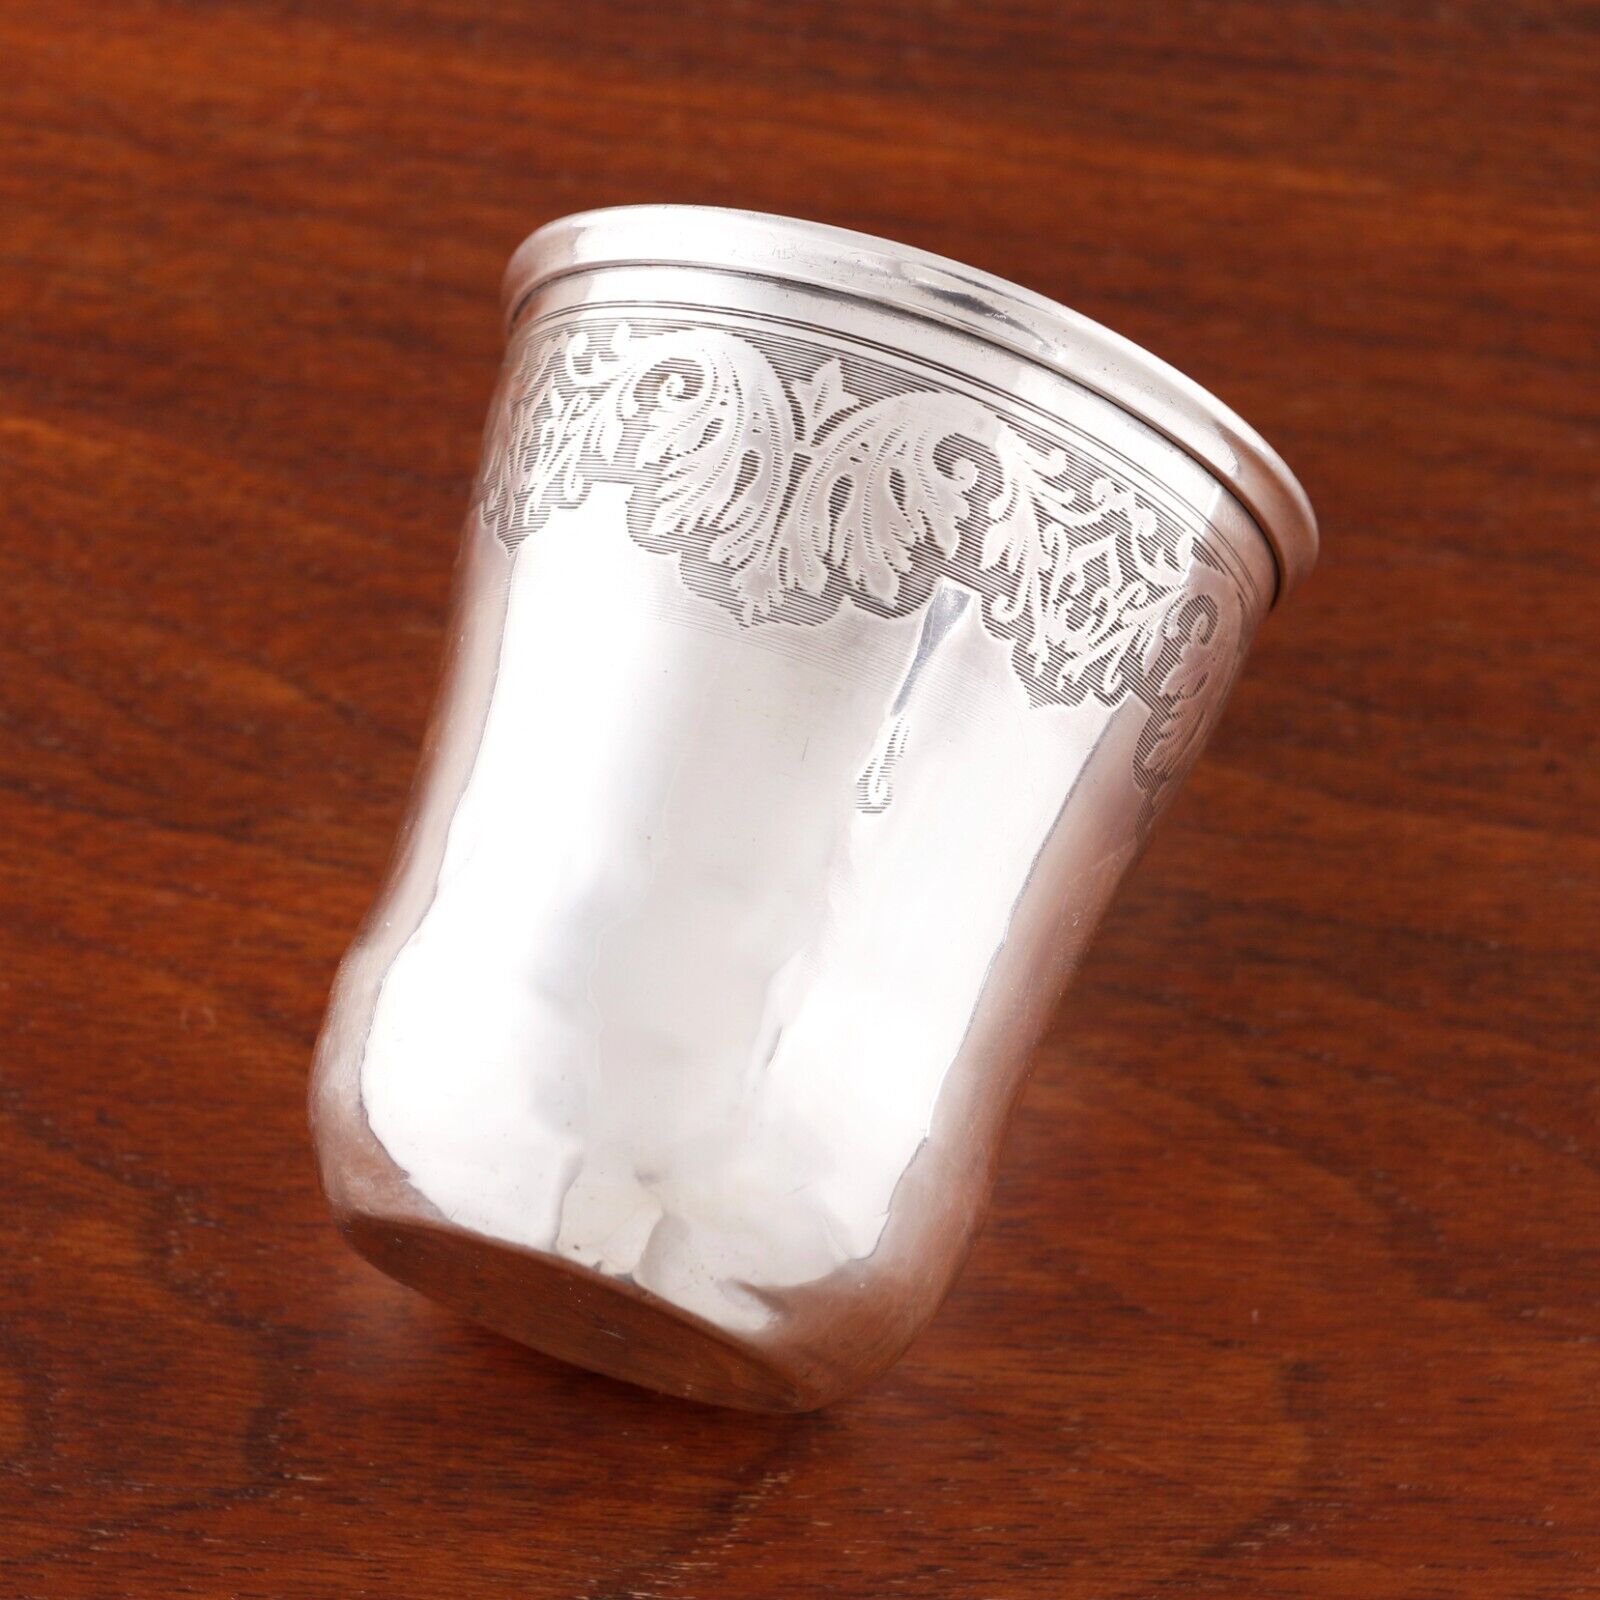 Antique Valuations: CHARLES BARRIER FRENCH AESTHETIC 950 SILVER CUP FOLIATED BAND NO MONOGRAM